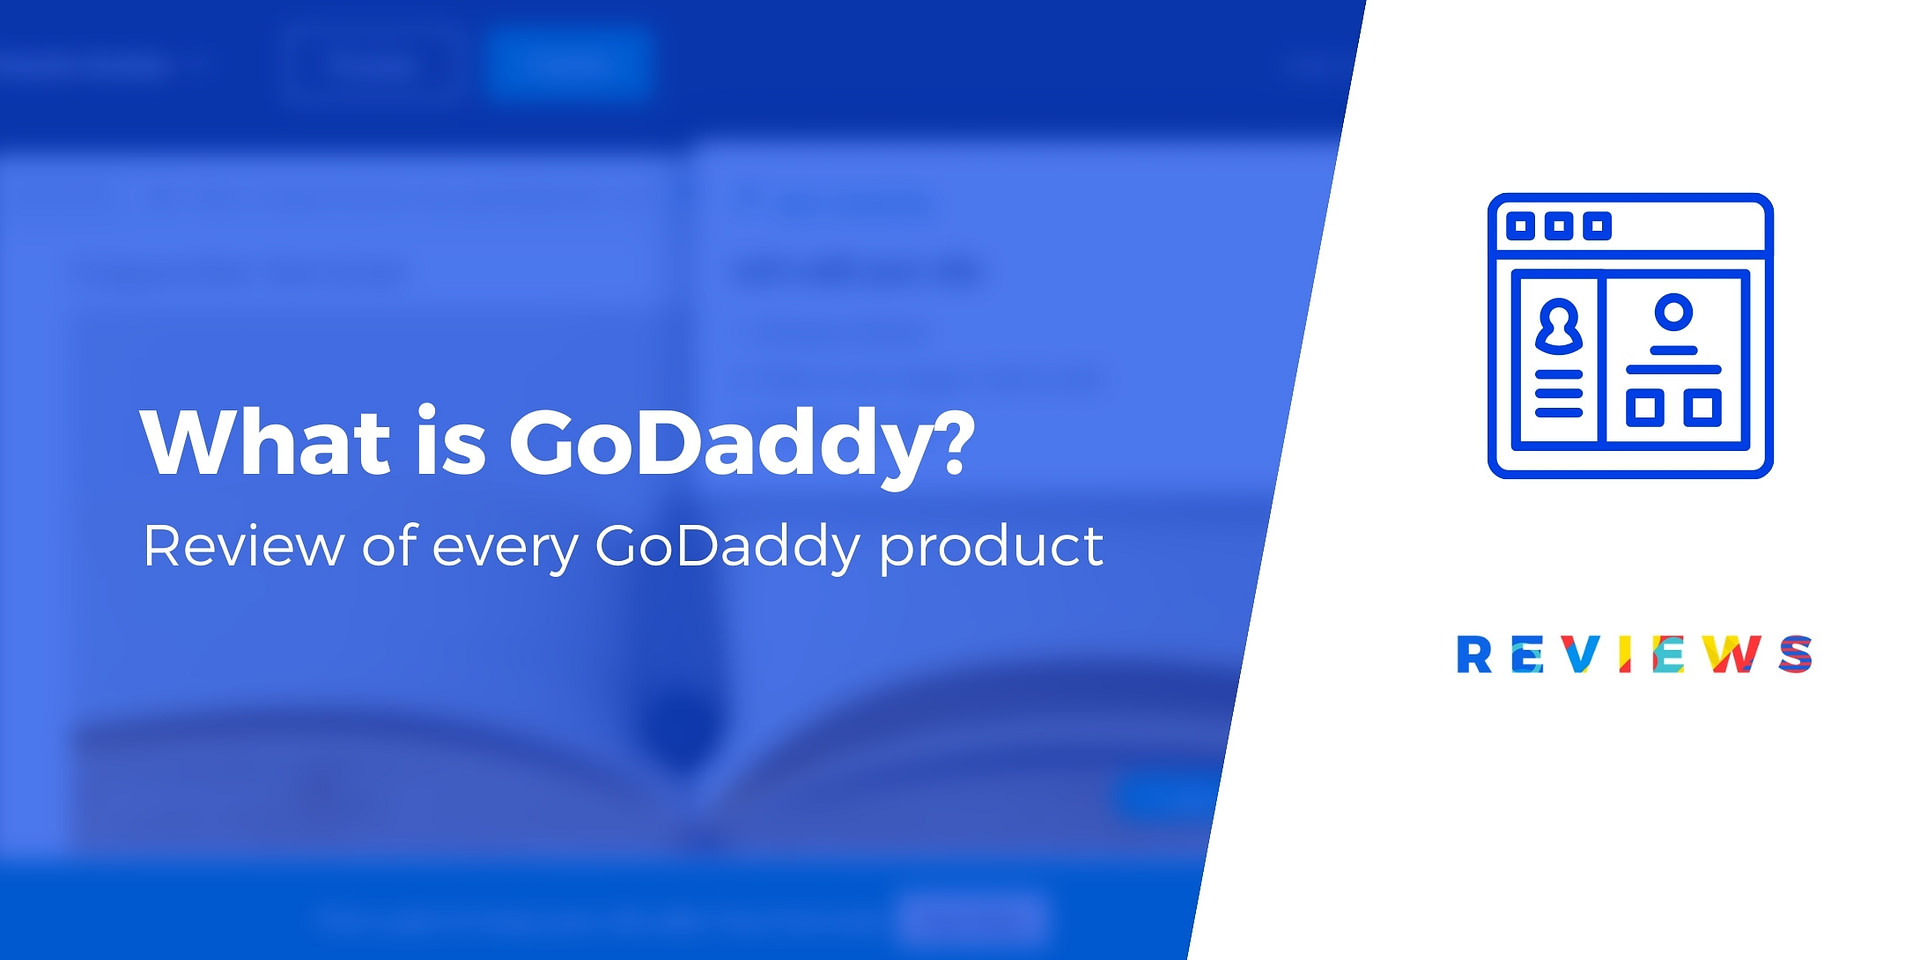 Chat godaddy email Godaddy payments